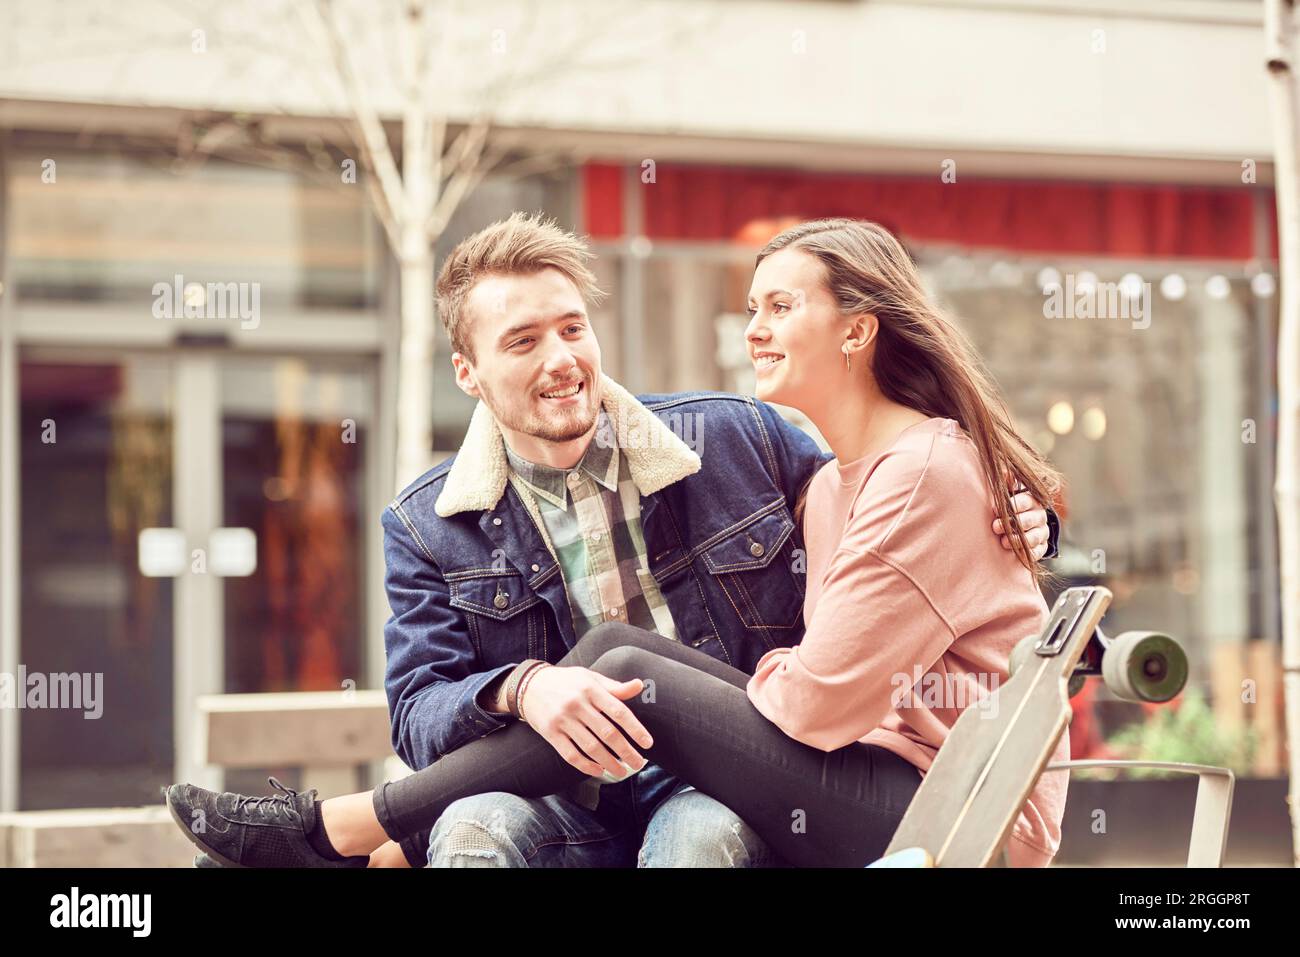 Sexy Girlfriend Sitting In Boyfriends Lap And Smiling While He Is Holding  Her Stock Photo, Picture and Royalty Free Image. Image 97715829.